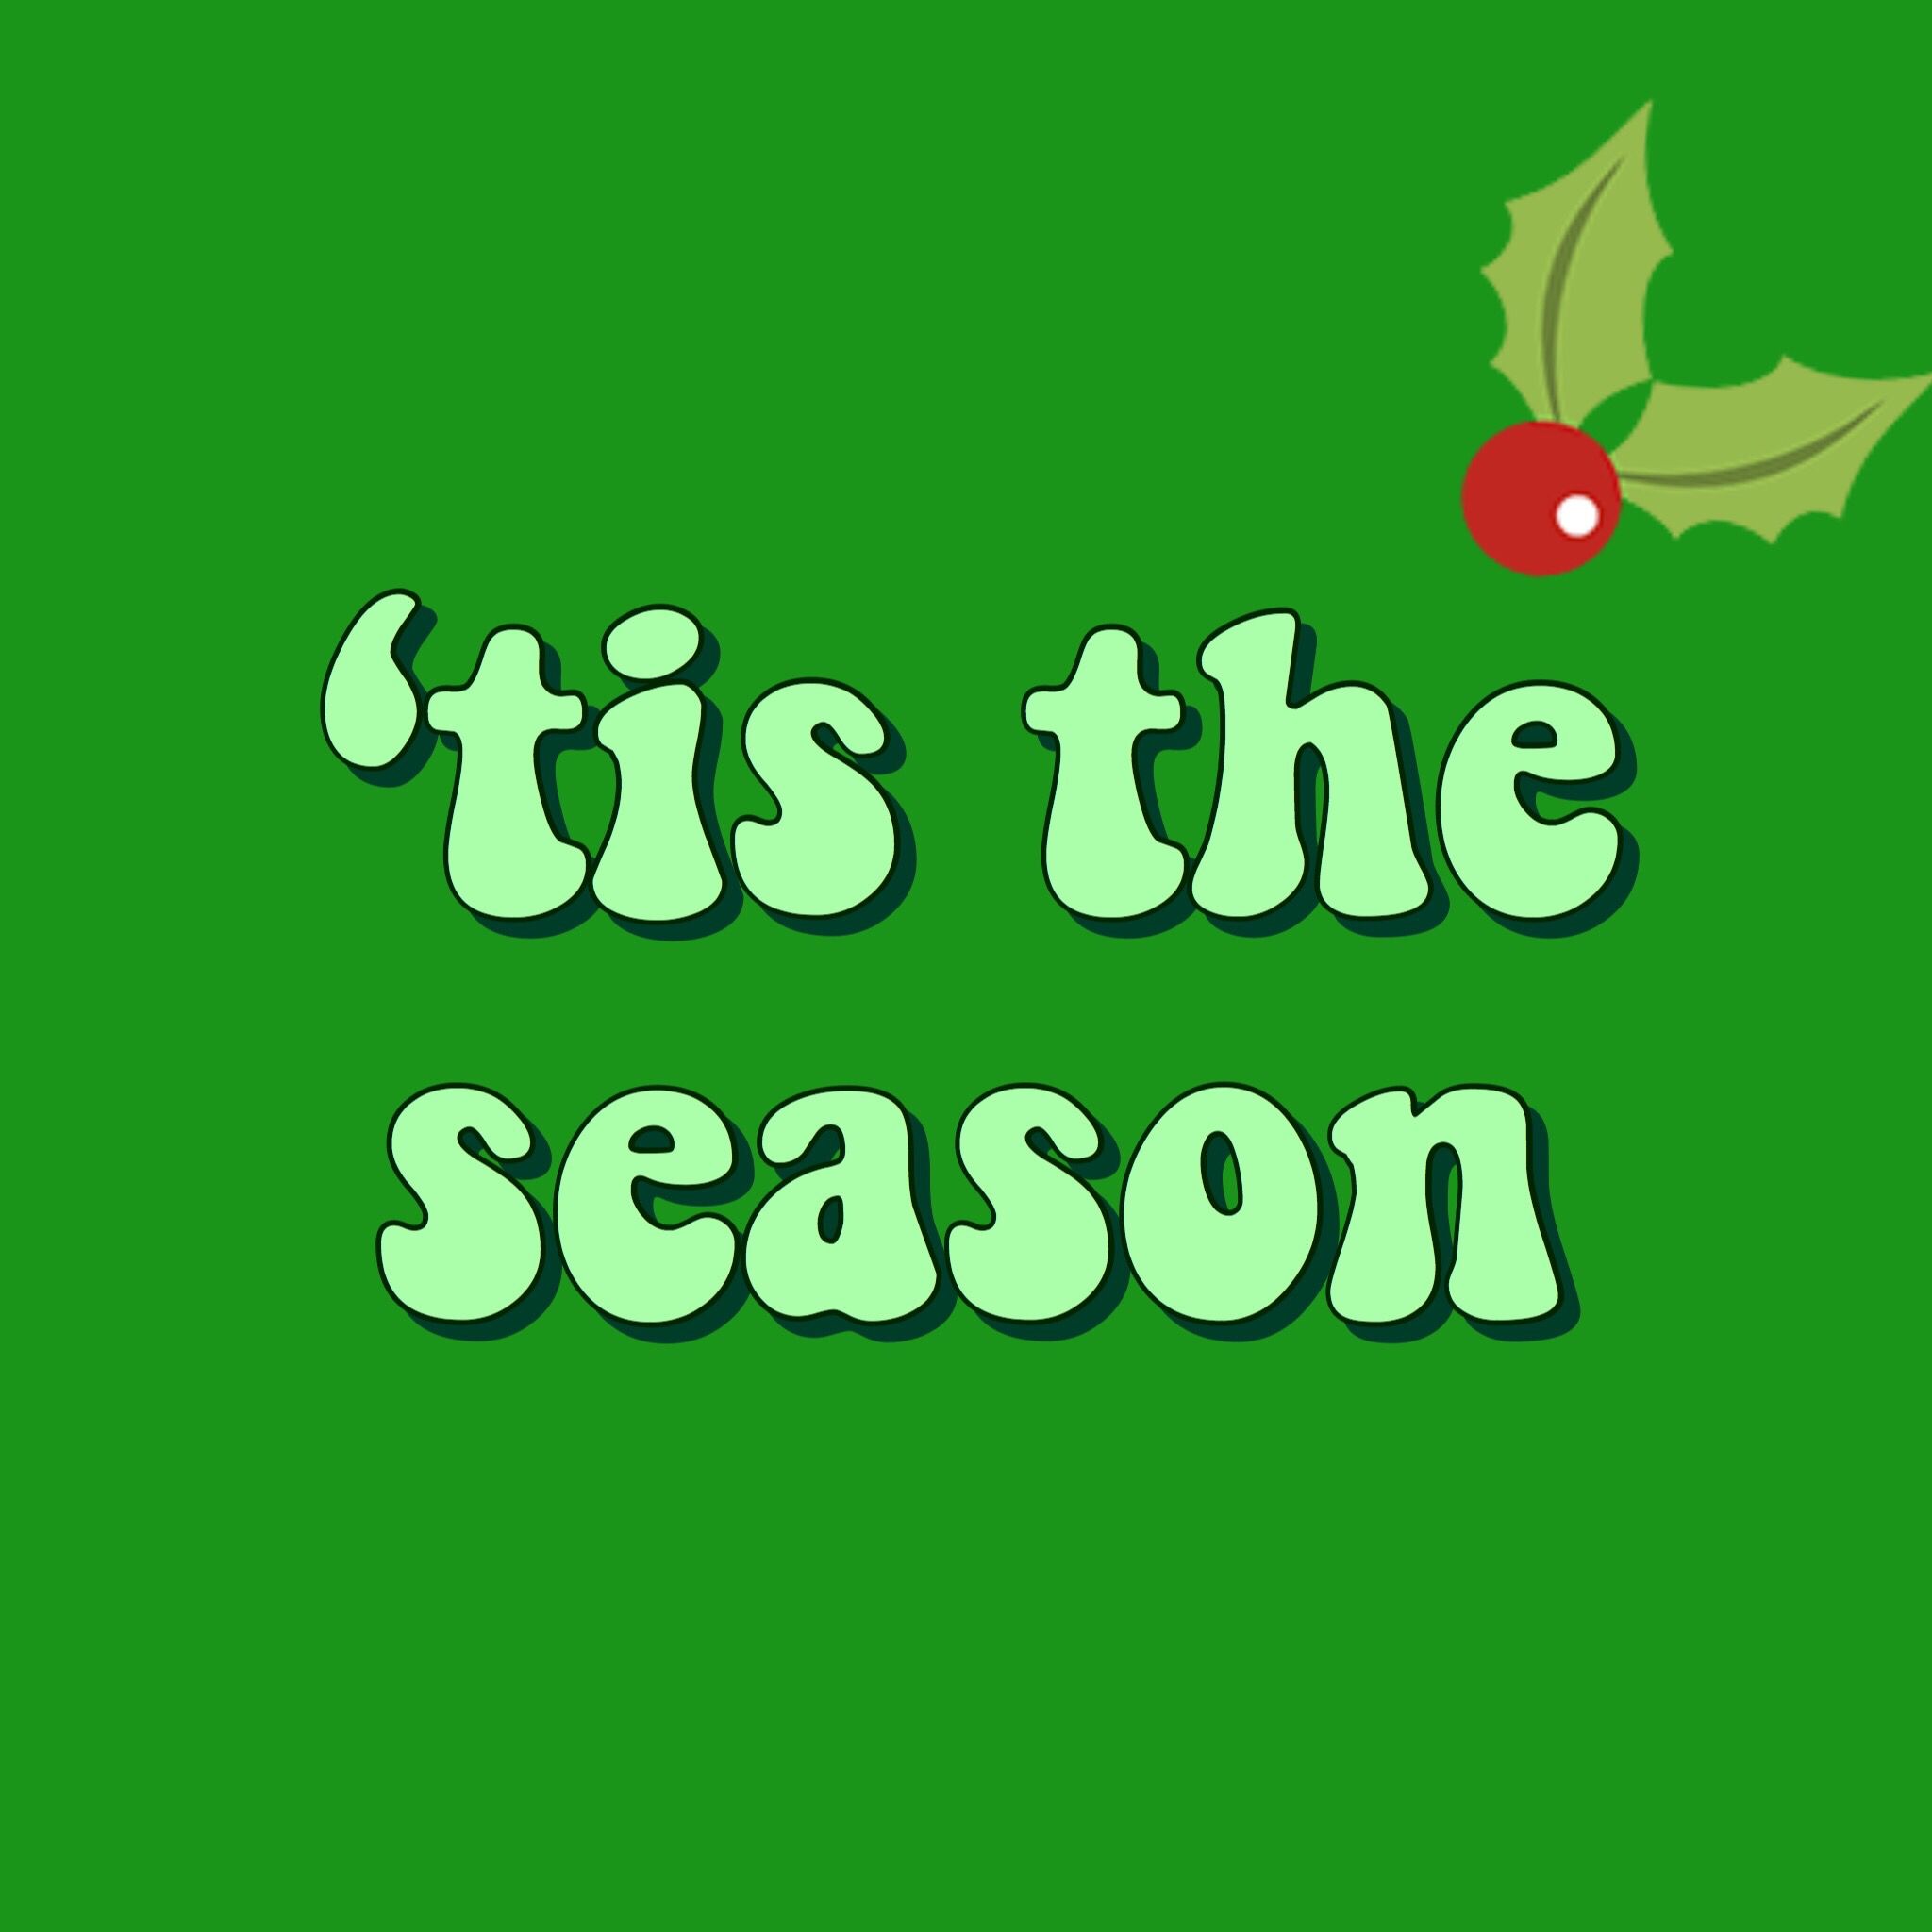 tis the season quote song. Cute christmas wallpaper, Christmas wallpaper tumblr, Christmas phone background